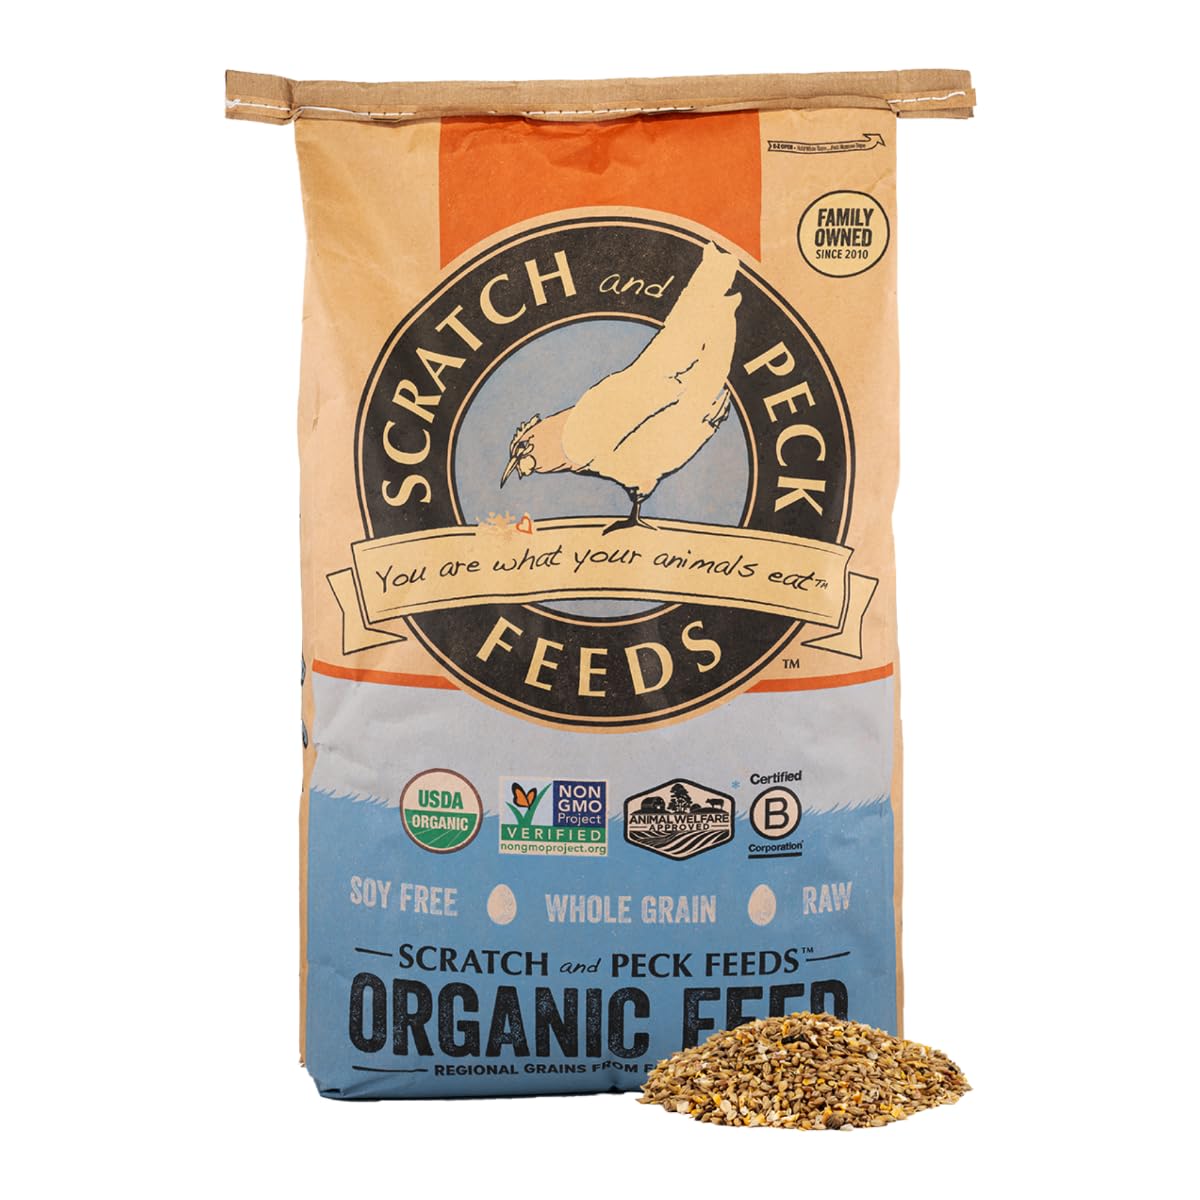 SCRATCH AND PECK FEEDS YOU ARE WHAT YOUR ANIMALS EAT Scratch and Peck Feeds Organic Scratch + corn, 9% Protein - Premium Supplemental grain Source for chickens and Ducks - 40lb